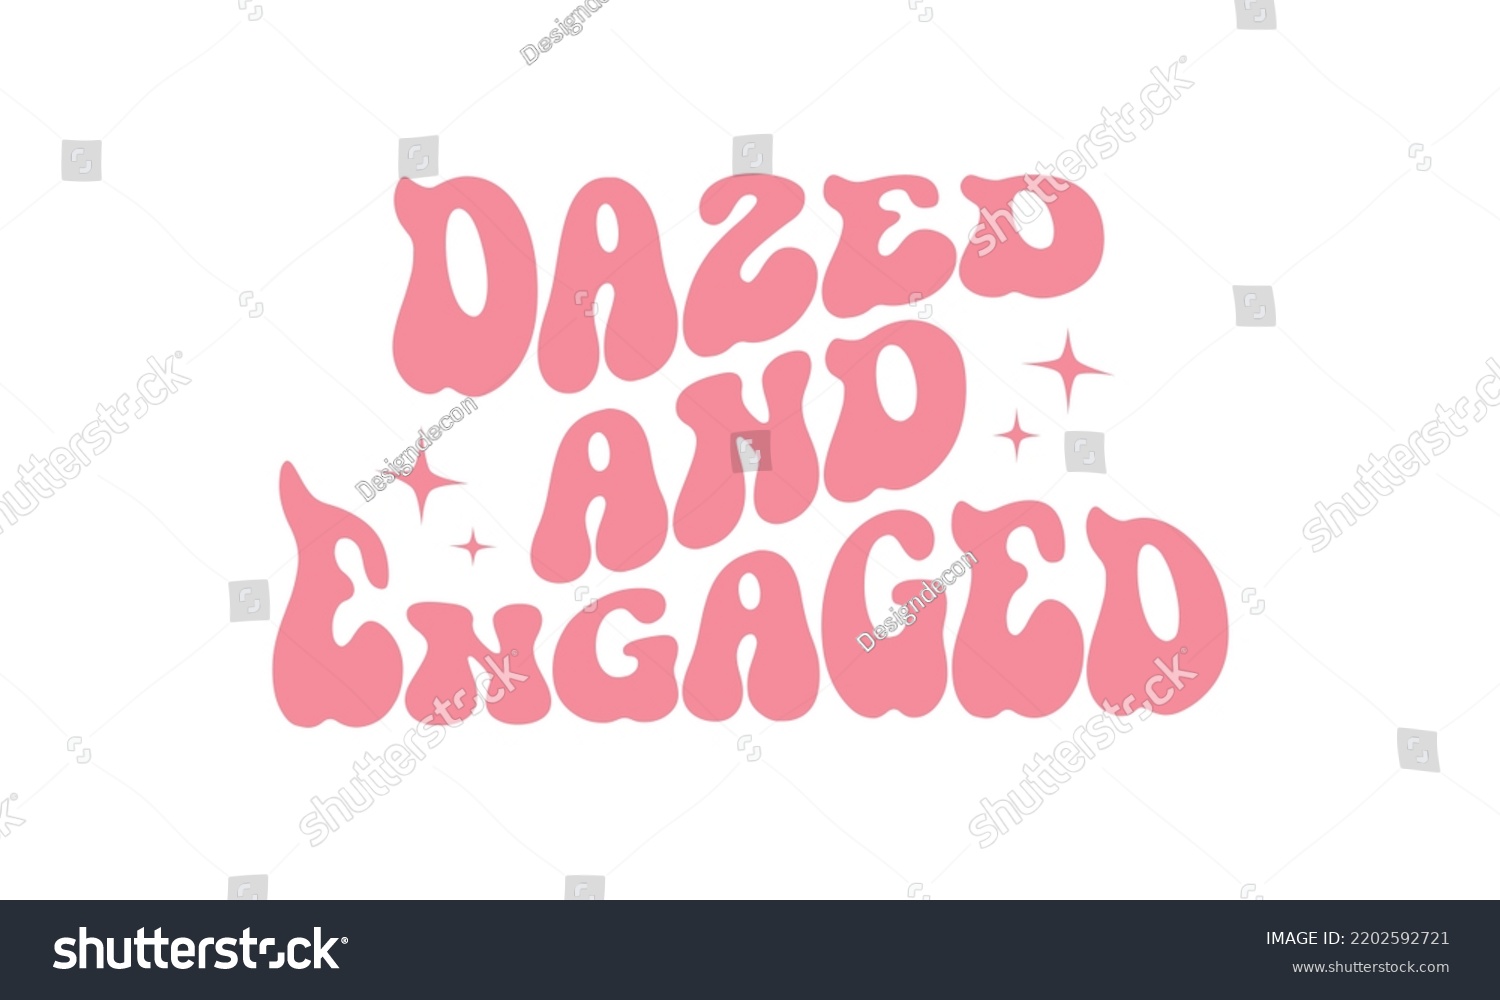 SVG of Dazed and Engaged Wedding quote retro wavy typography sublimation SVG on white background svg